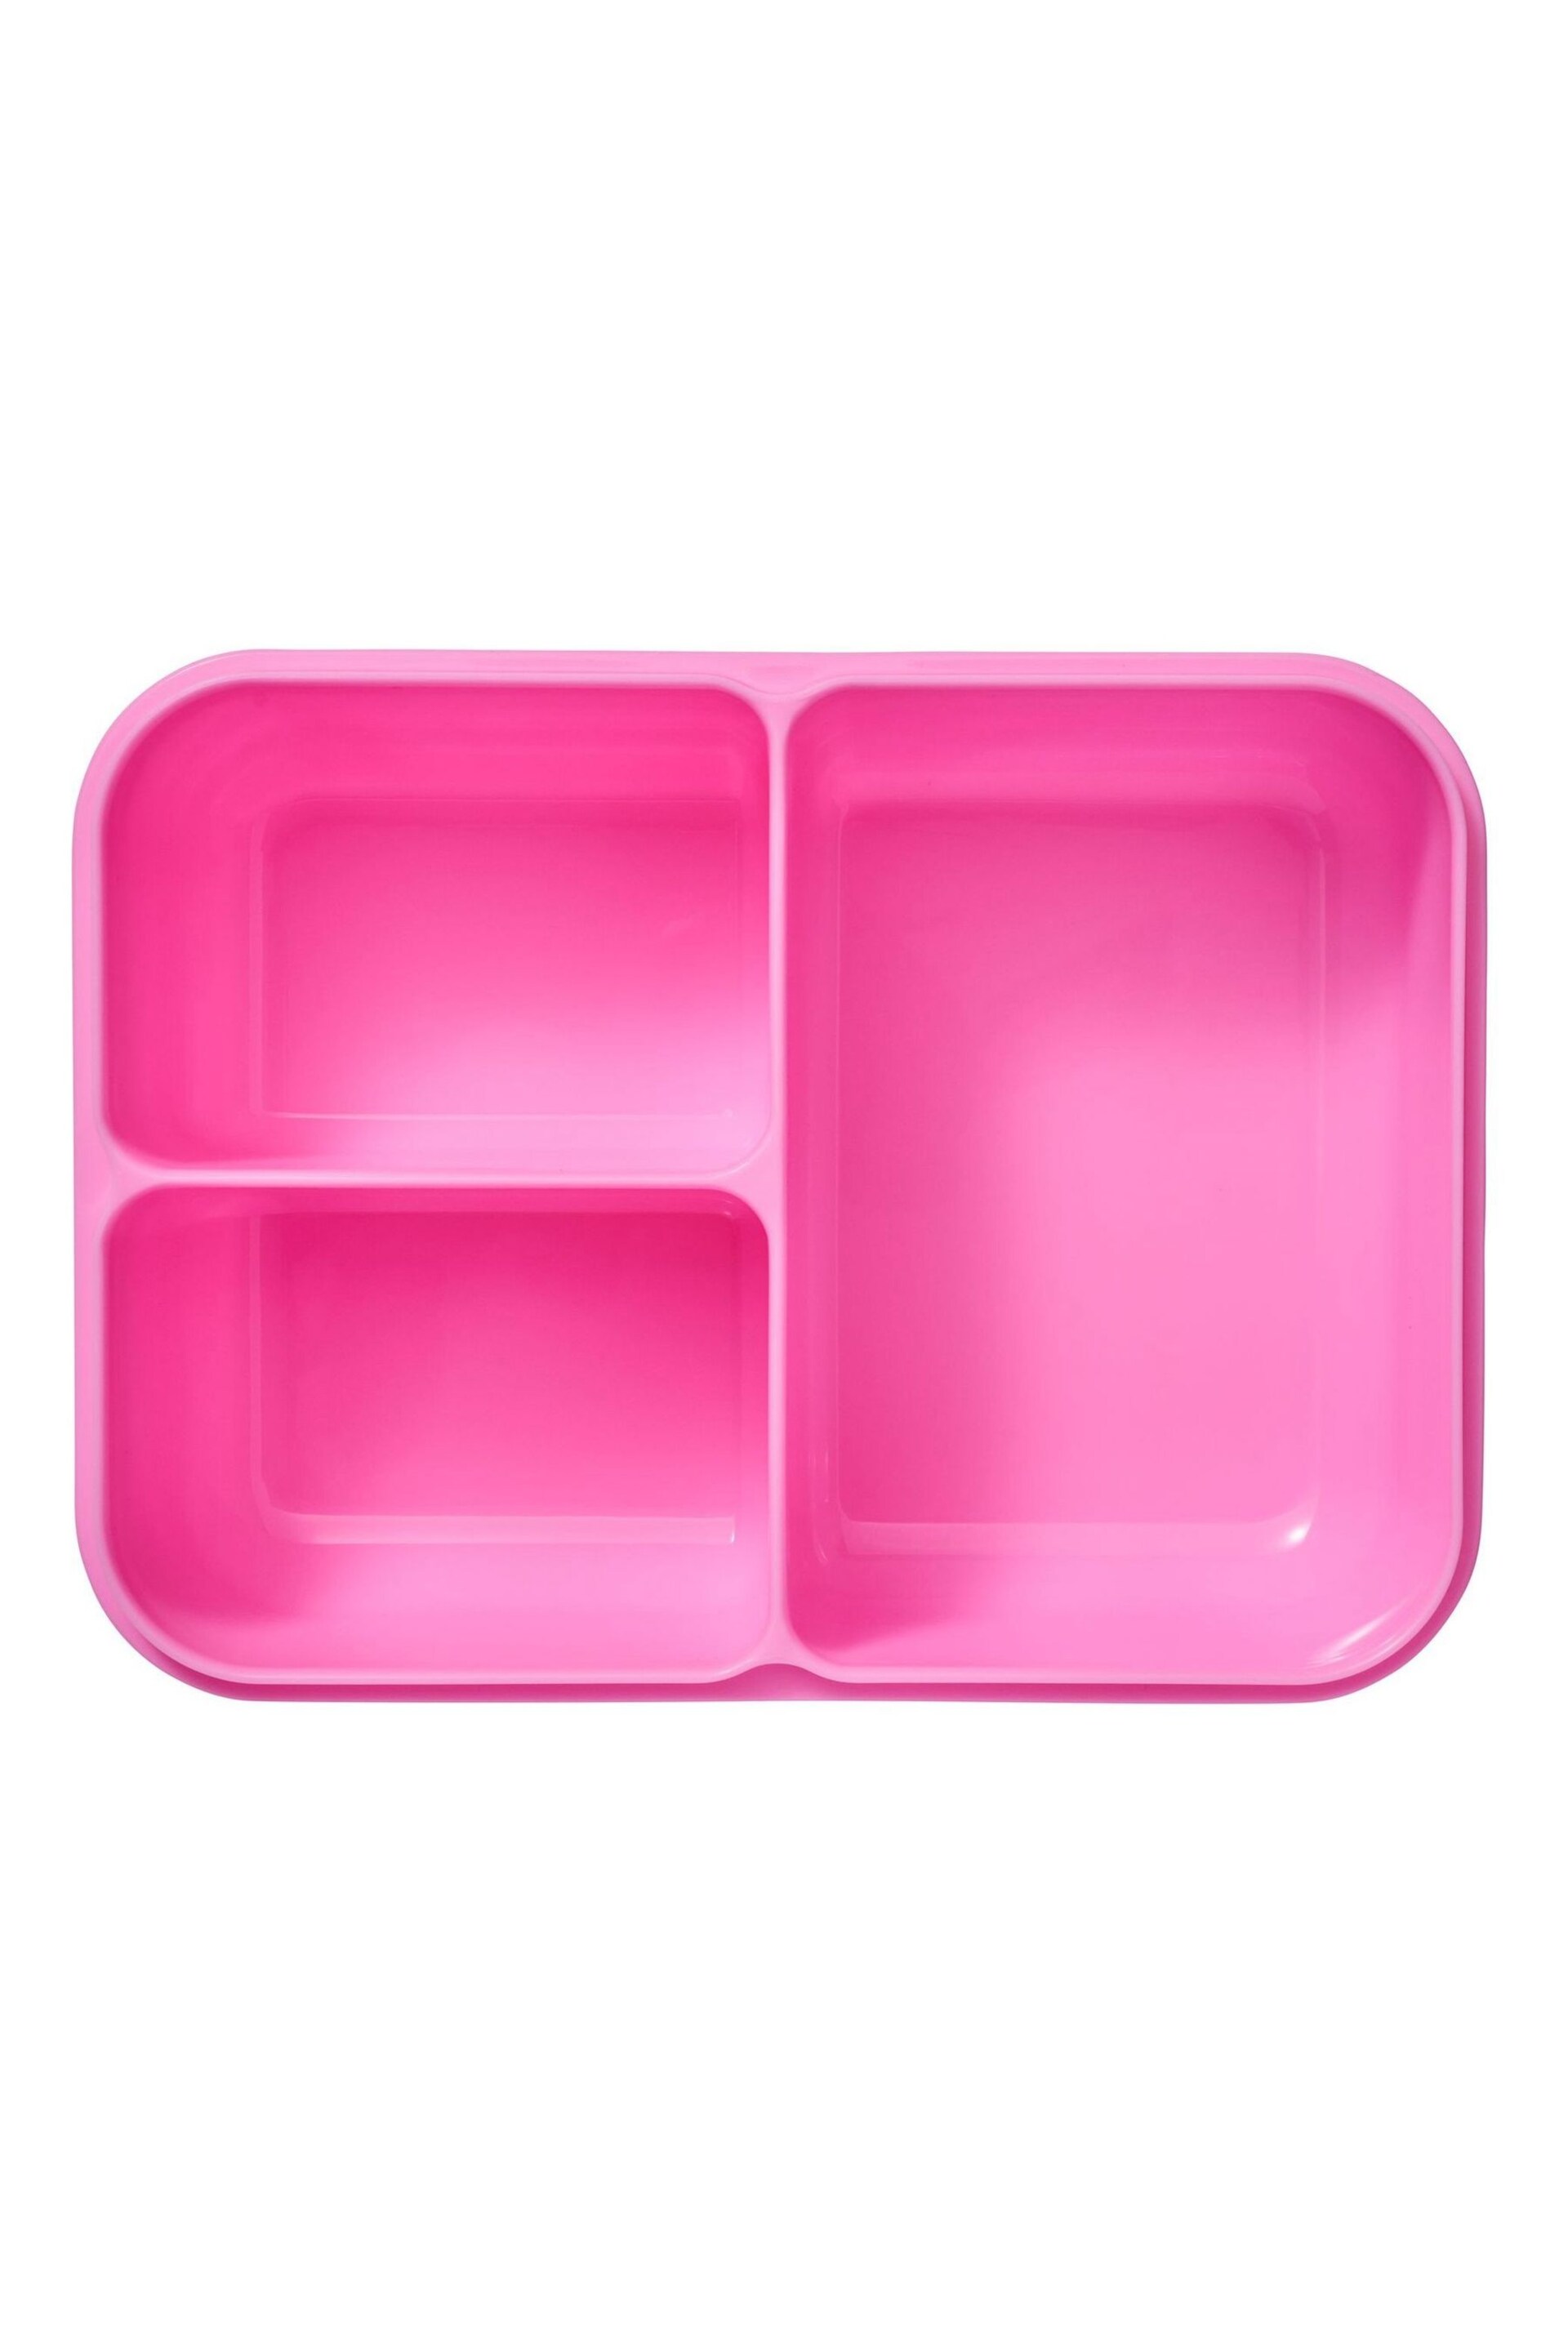 Smiggle Pink Epic Adventures Boost Trio Lunchbox - Image 3 of 3